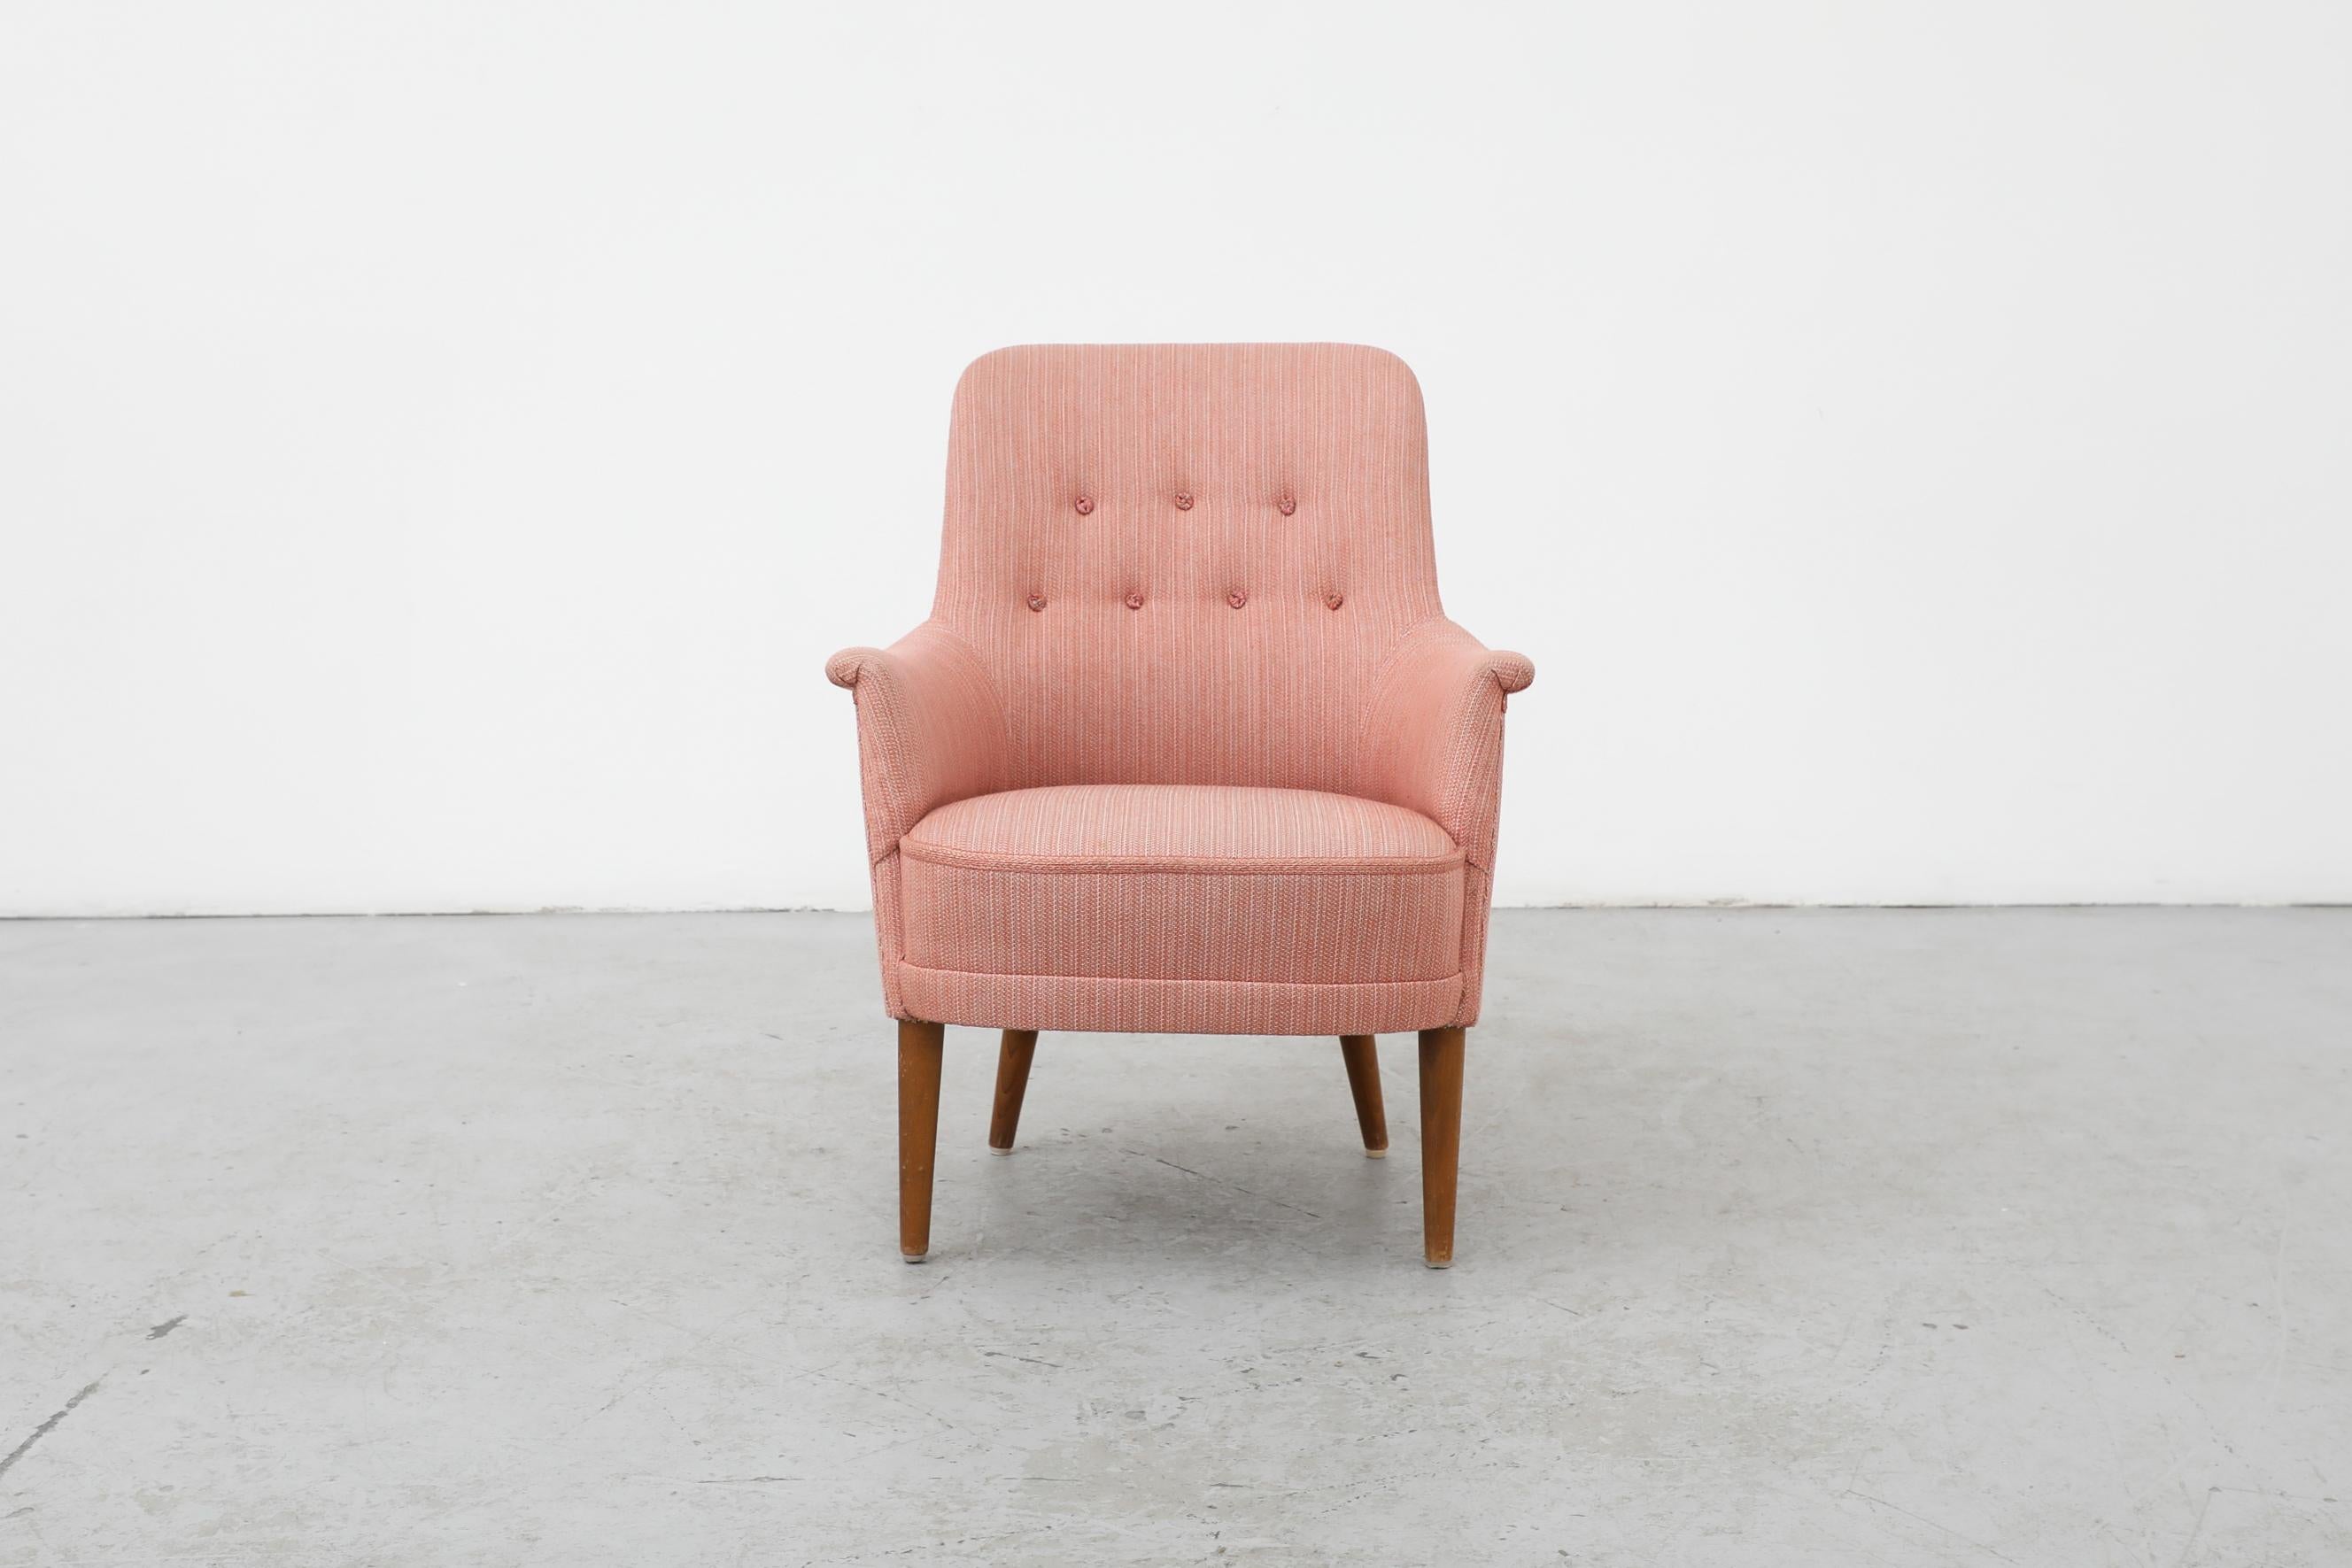 Vintage 'Husmor' pink lounge chair designed by Carl Malmsten for O.H. Sjögren. In good condition with wood in original condition showing visible signs of wear consistent with its age and use. The upholstery was done by previous owner and shows some